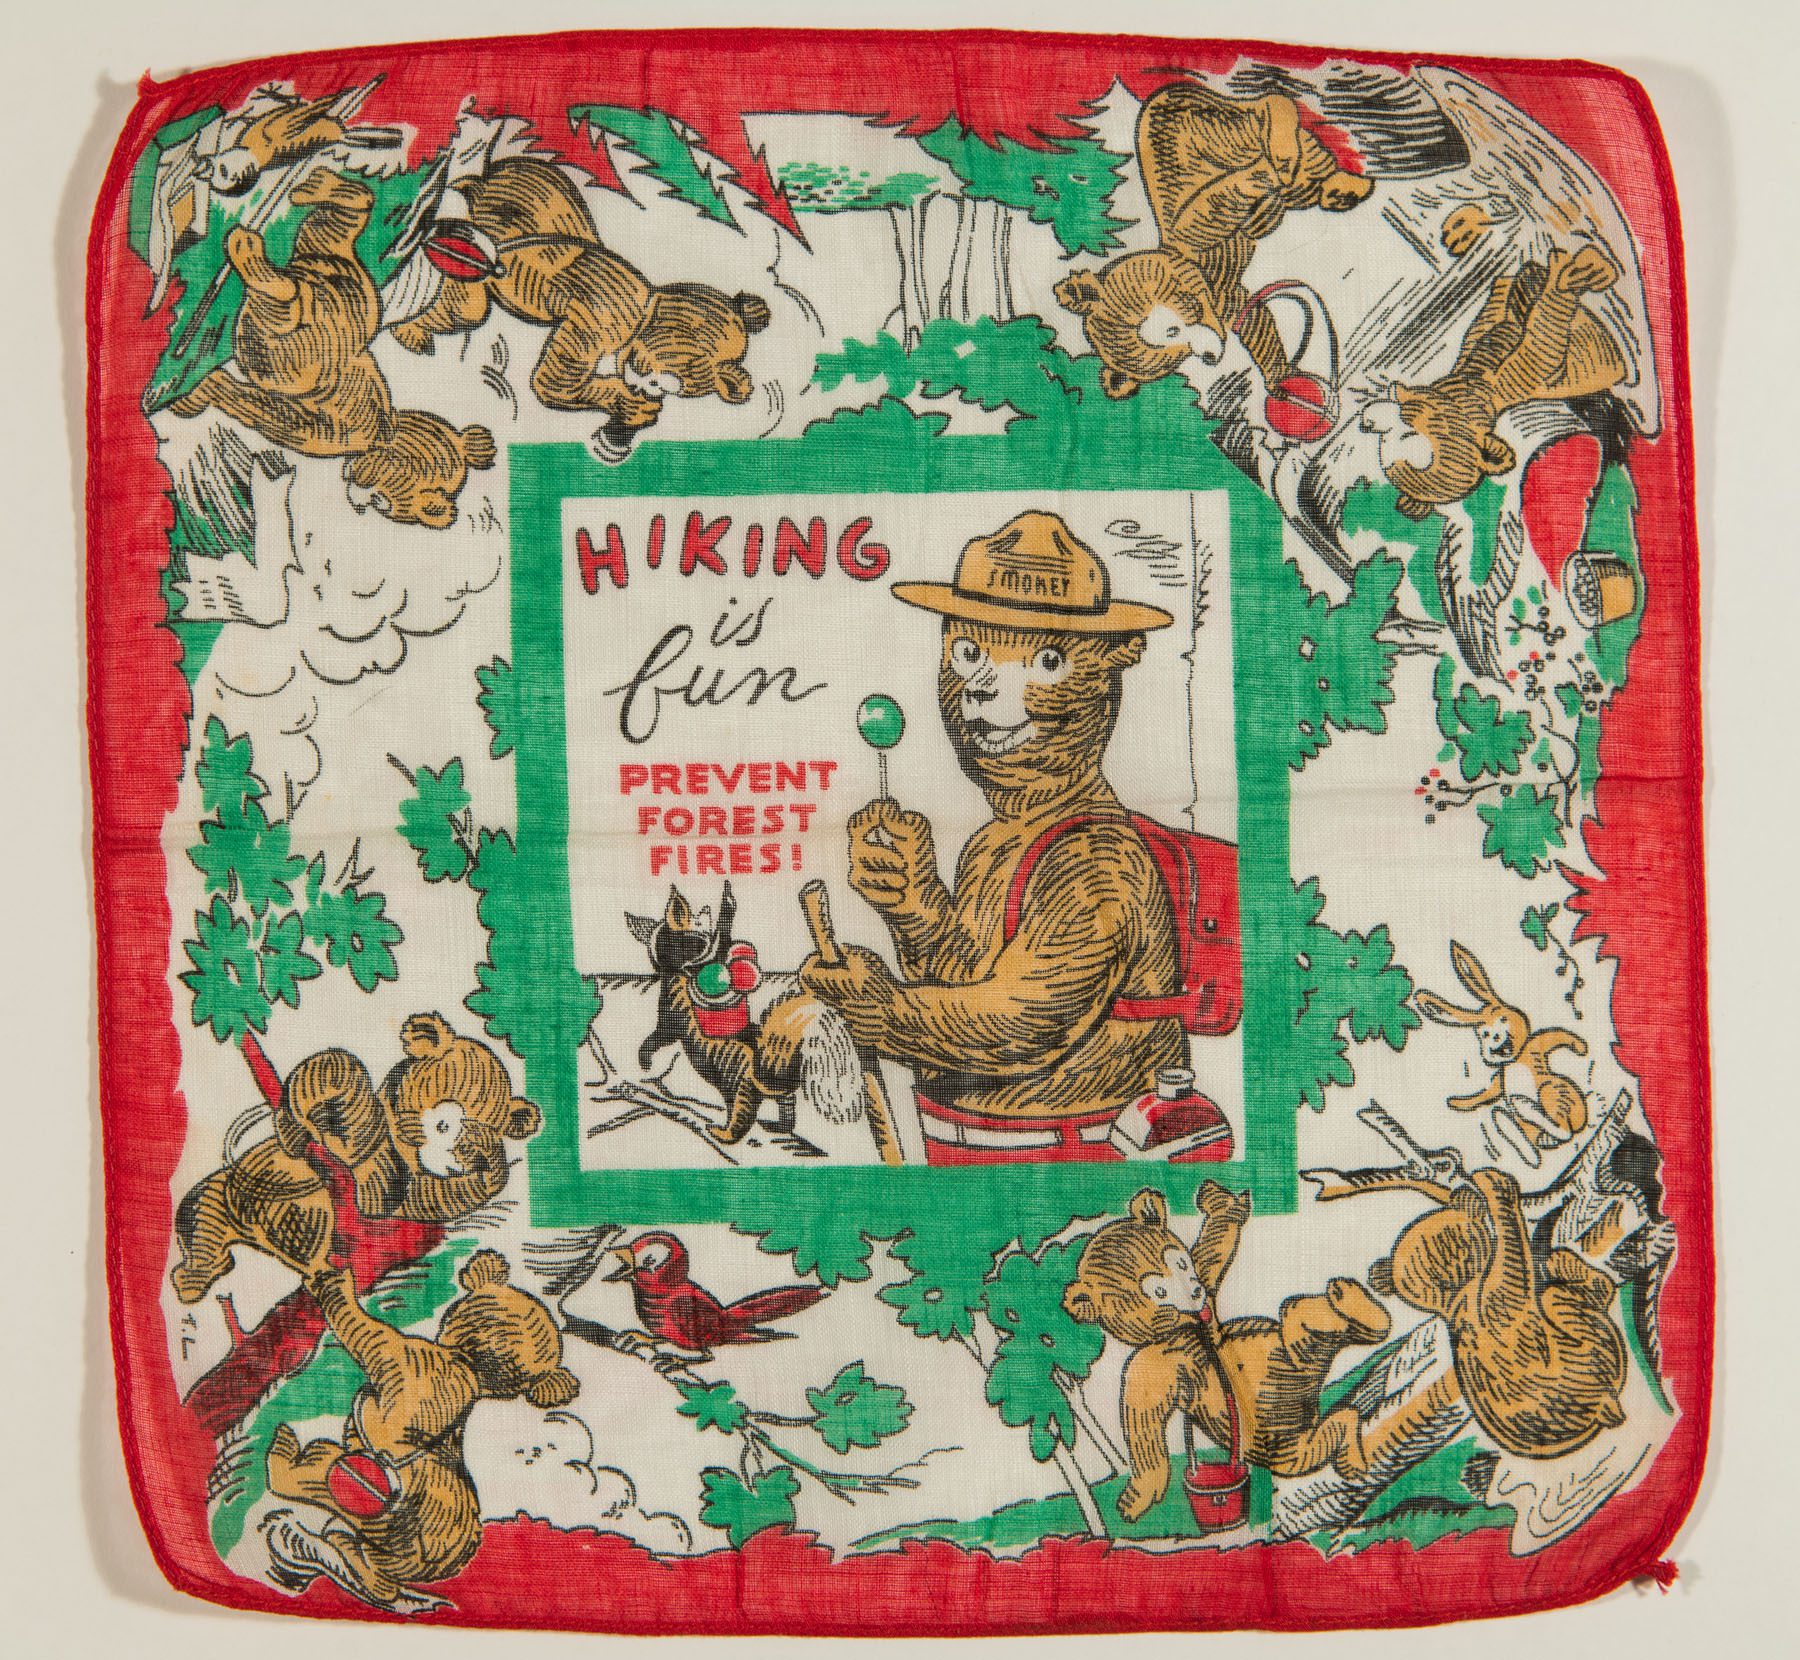 Hiking is Fun, Prevent Forest Fires! Child's Handkerchief